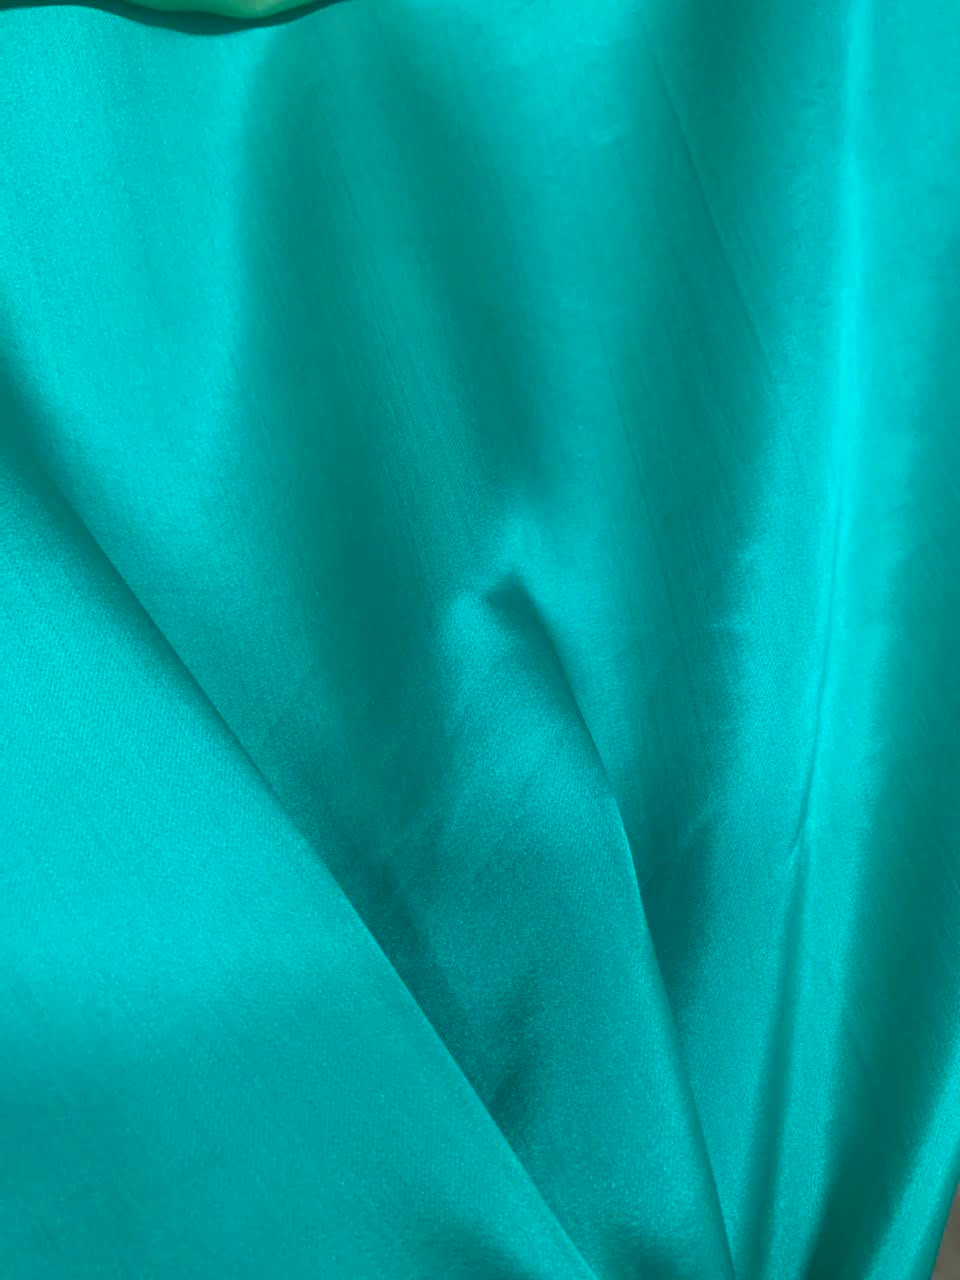 Turquoise Silk fabric by the yard - Natural silk - Pure Mulberry Silk